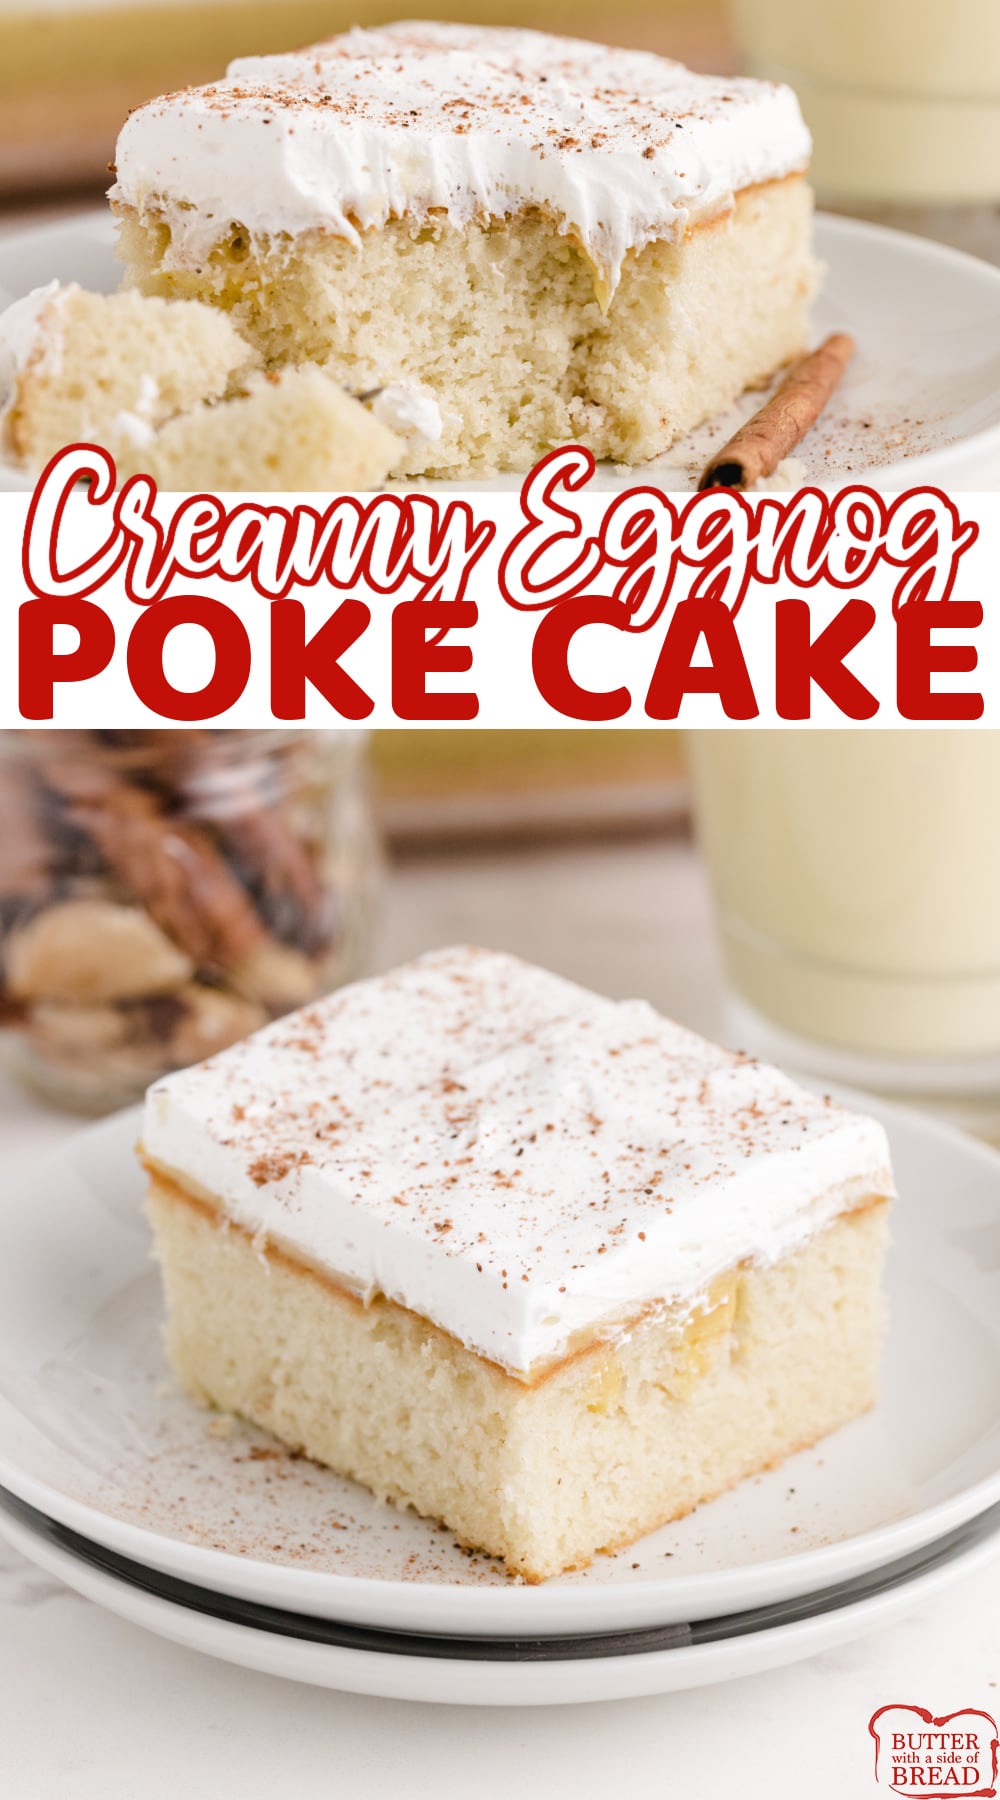 Eggnog Poke Cake made with a white cake mix, eggnog, vanilla pudding, and cool whip. Delicious moist cake recipe perfect for the holidays!